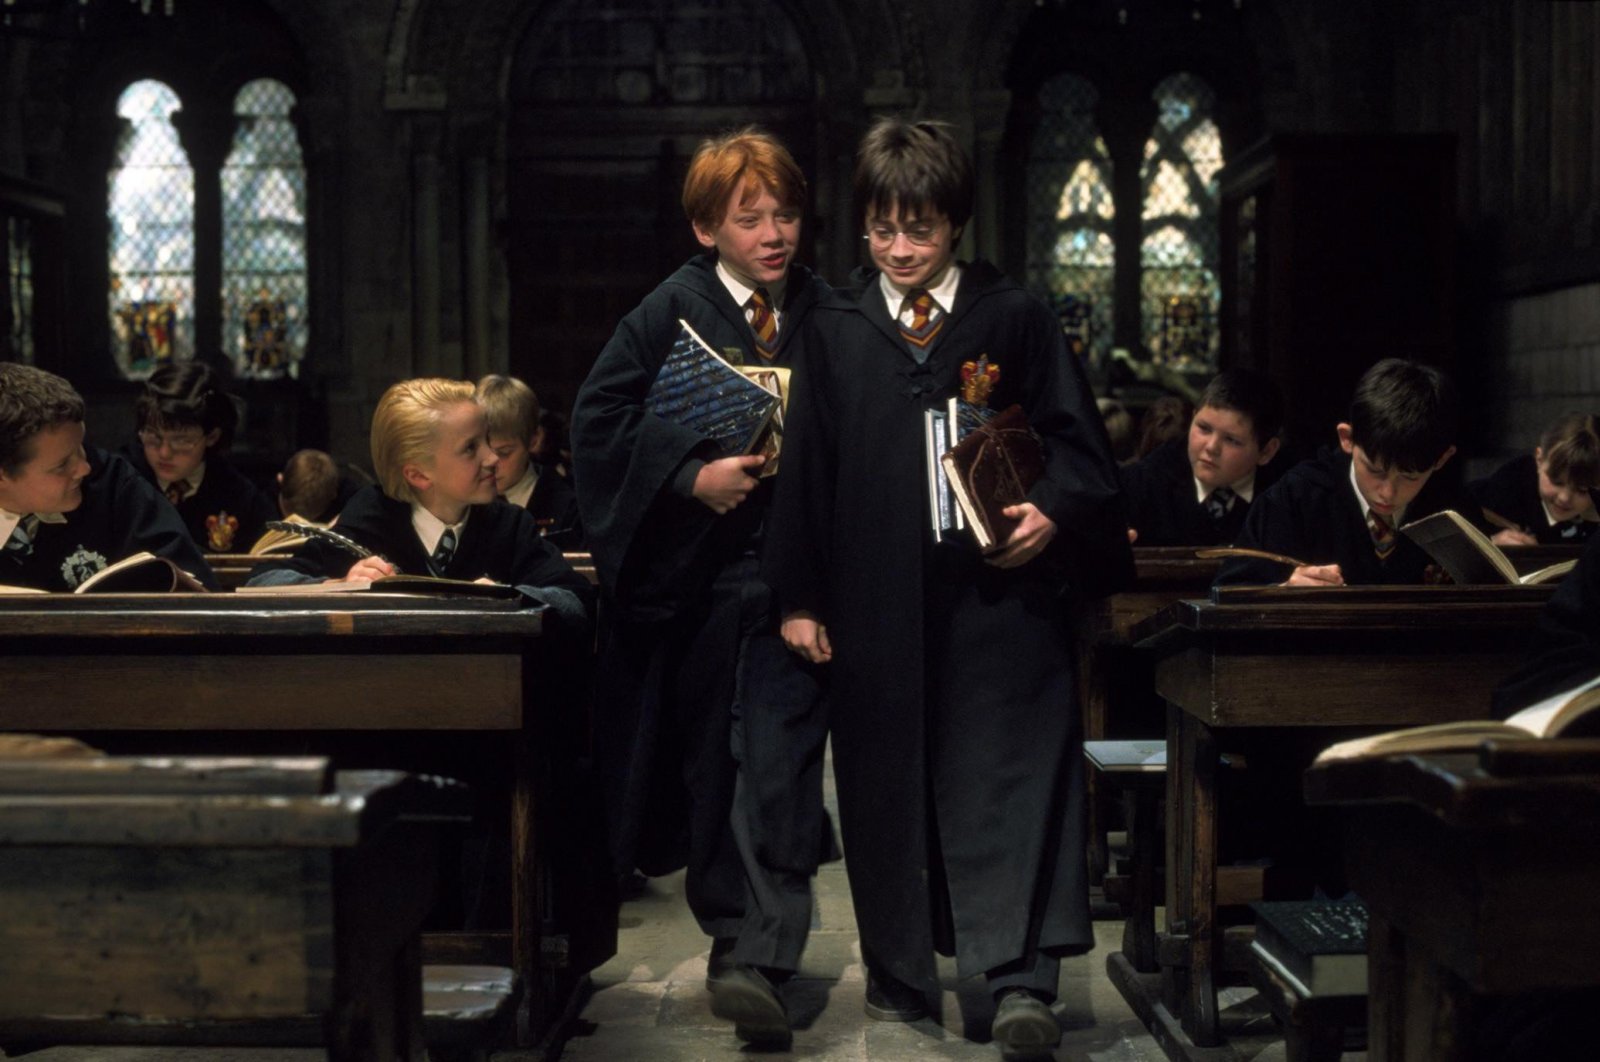 A still shot from "Harry Potter and the Philosopher's Stone" shows Rupert Grint as Ron Weasley (L) and Daniel Radcliffe as Harry Potter. 